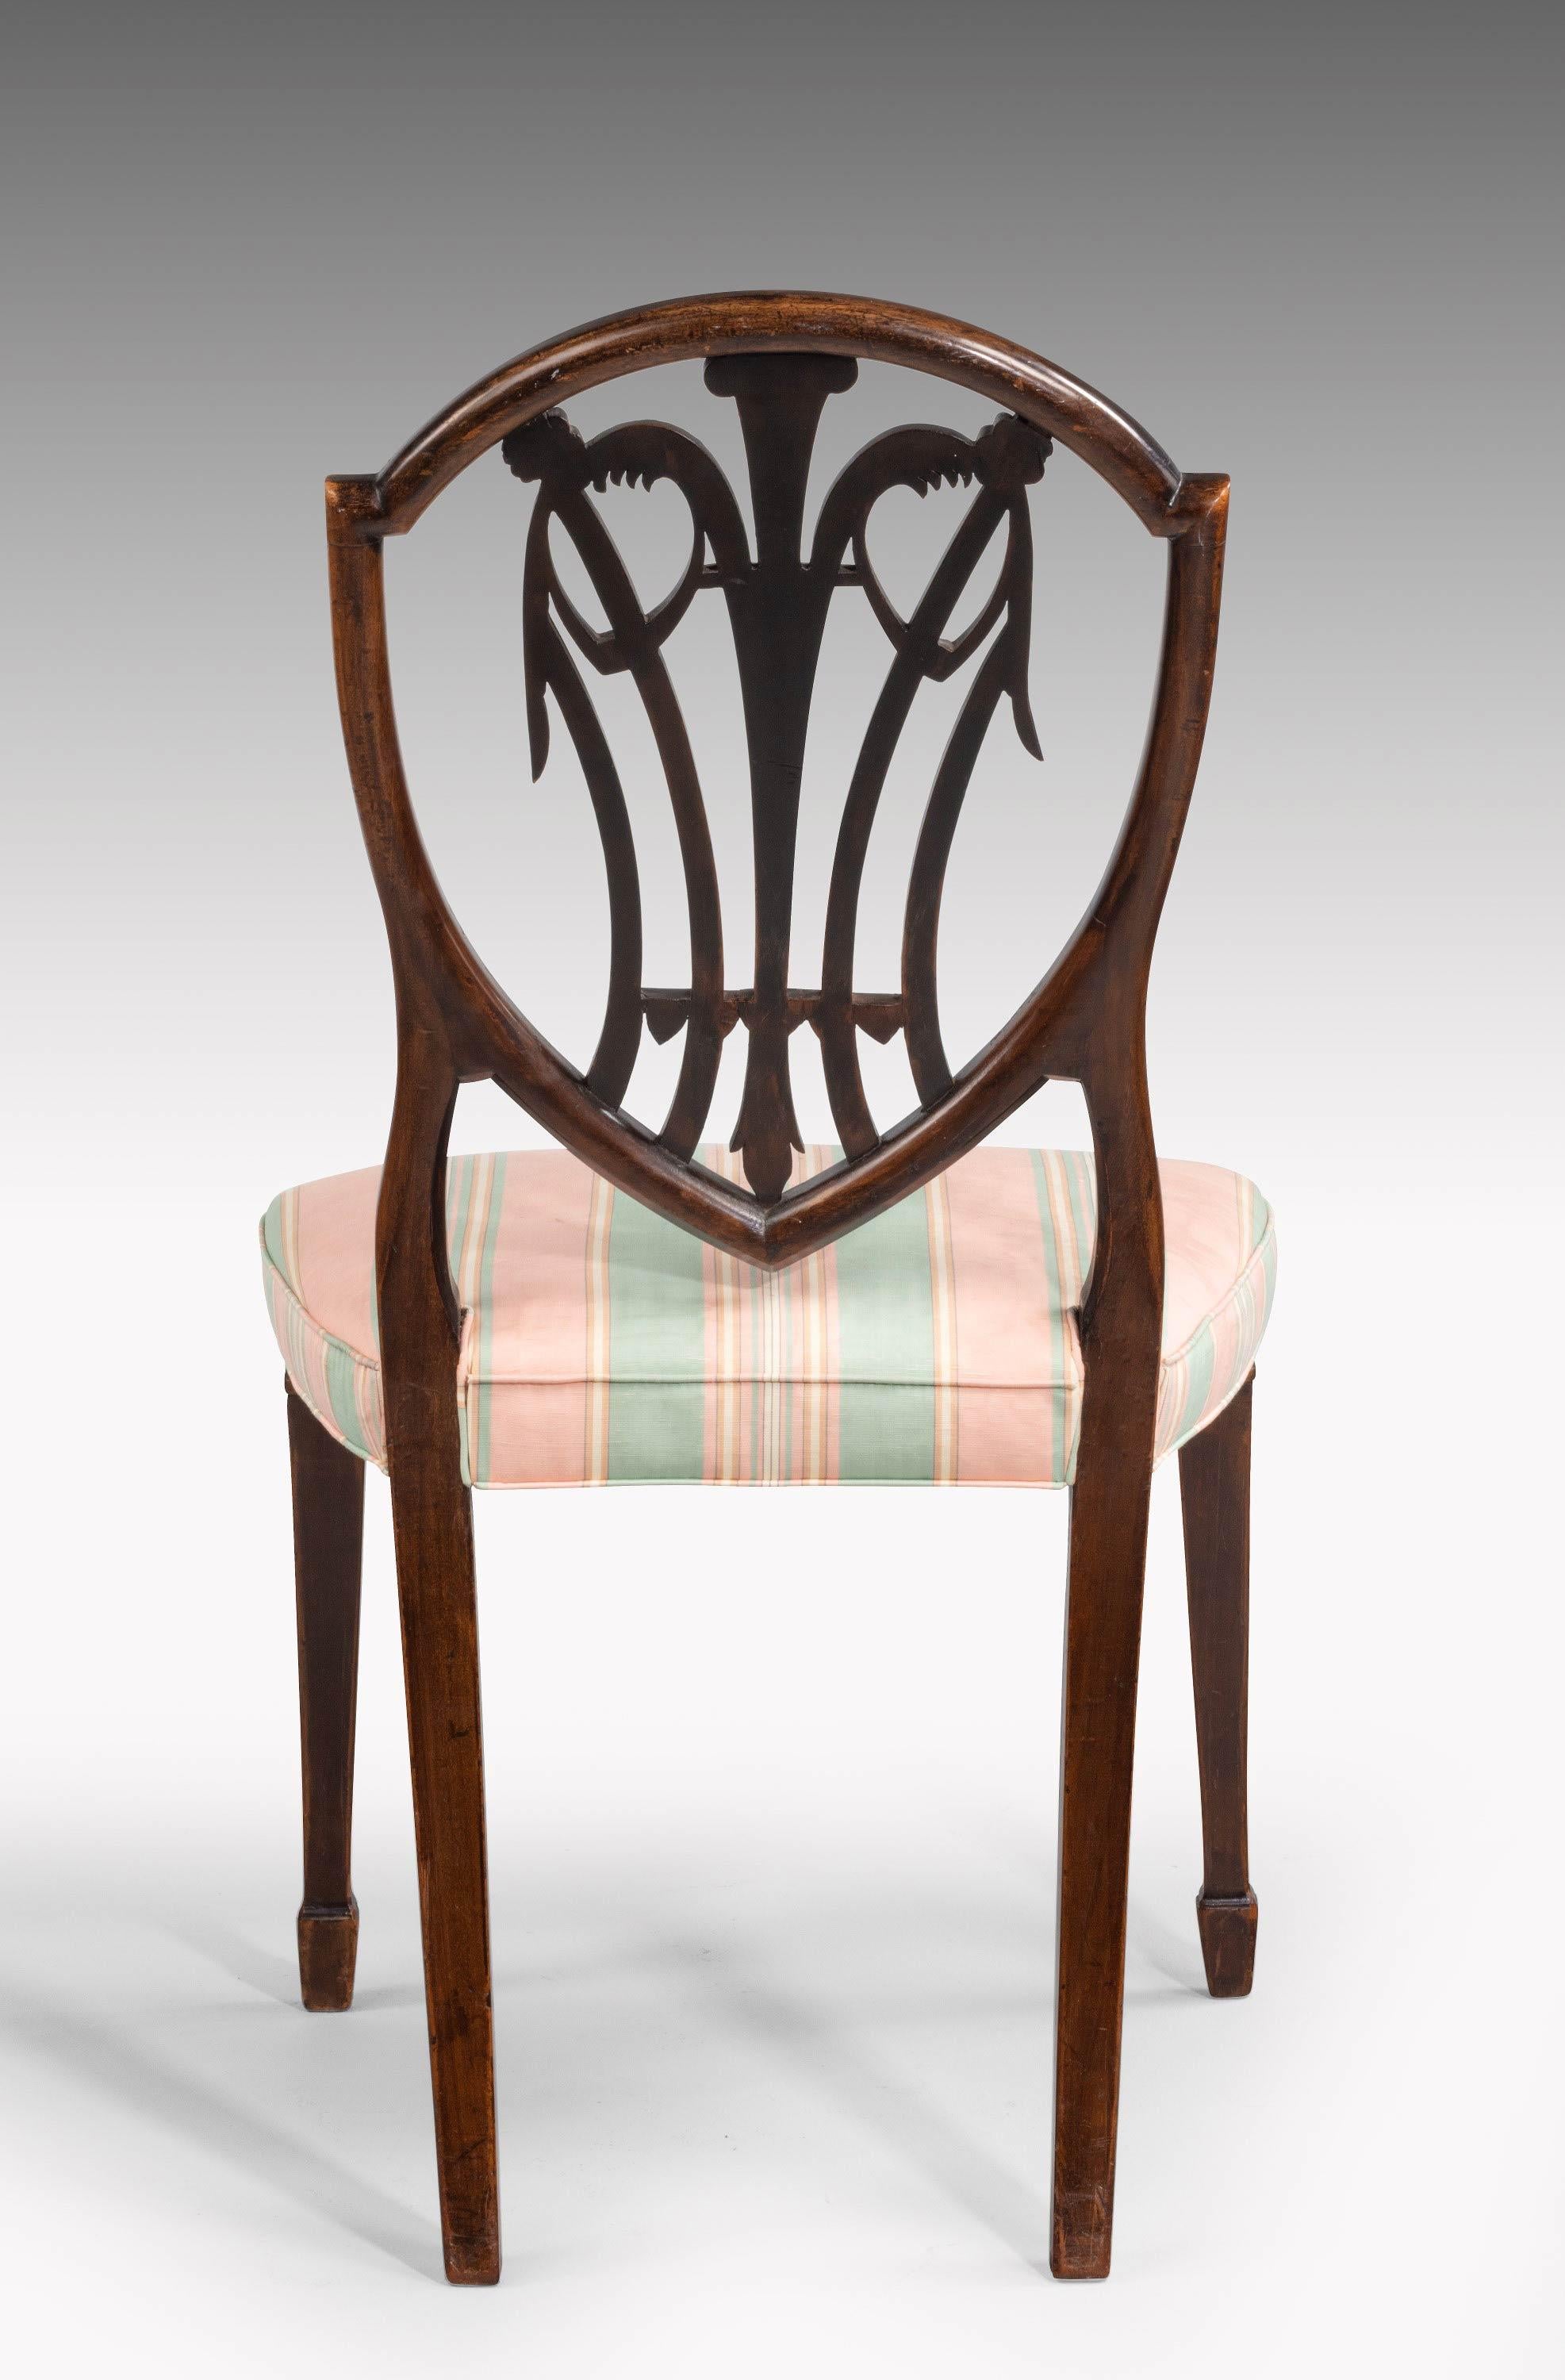 An extremely elegant set of eight mahogany chairs of typical Hepplewhite design. The shield shaped backs incorporating beautifully carved Prince of Wales feathers and descending bell flowers. The carvings of quite exceptional quality. 

Seat